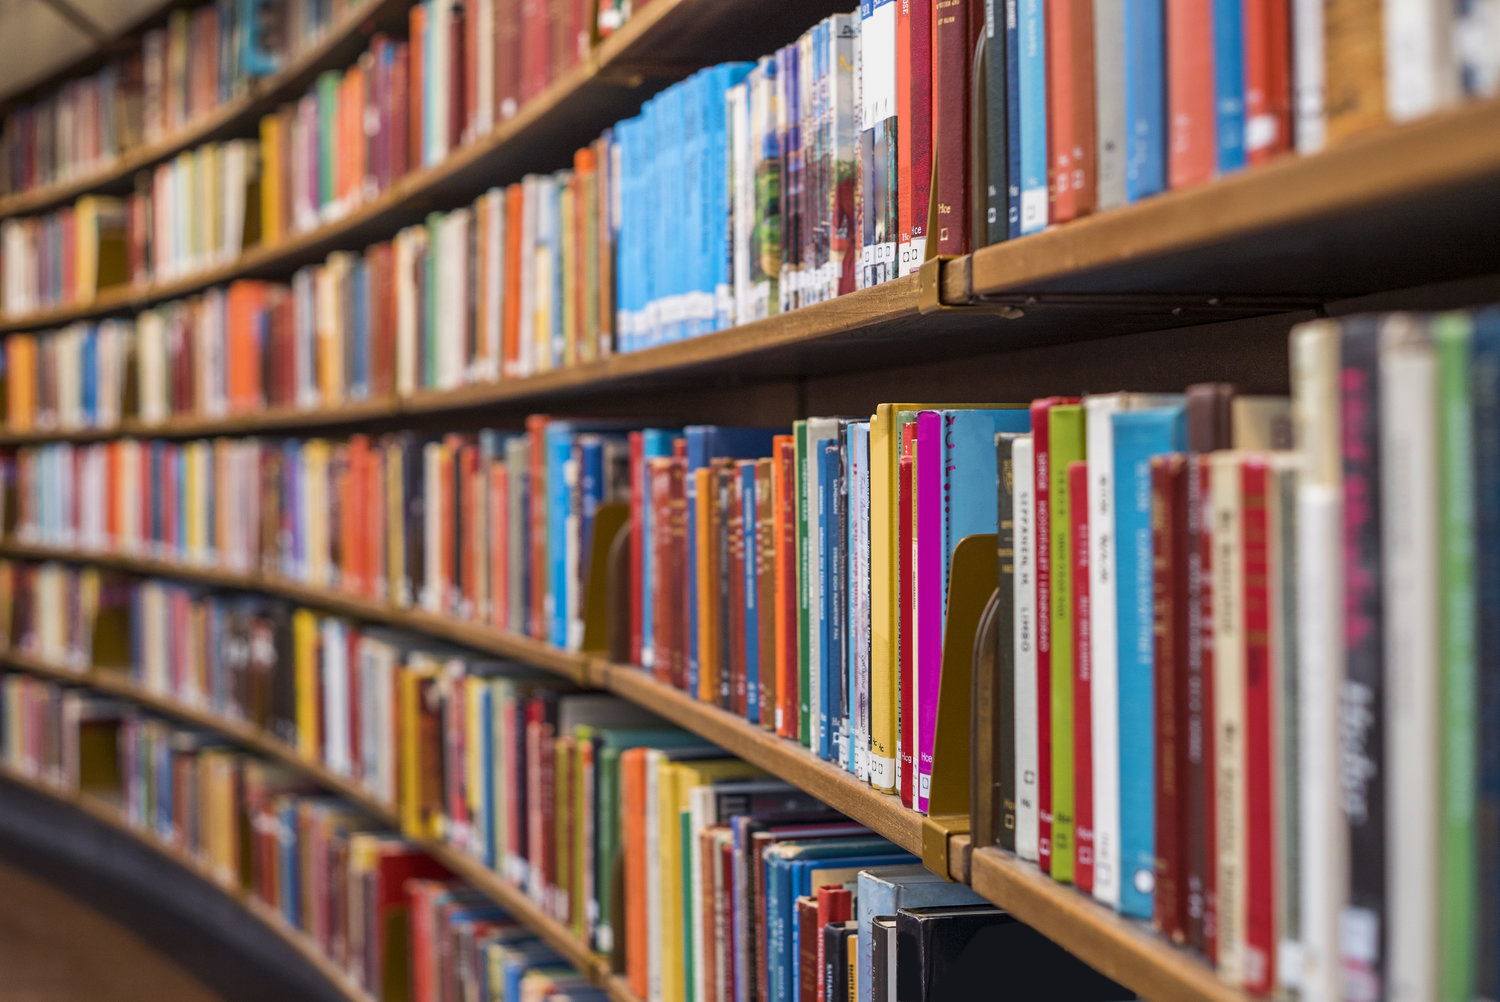 Jervis Public Library, 613 N. Washington St., will offer a special clearance book sale during the school district’s spring break Thursday through Saturday.